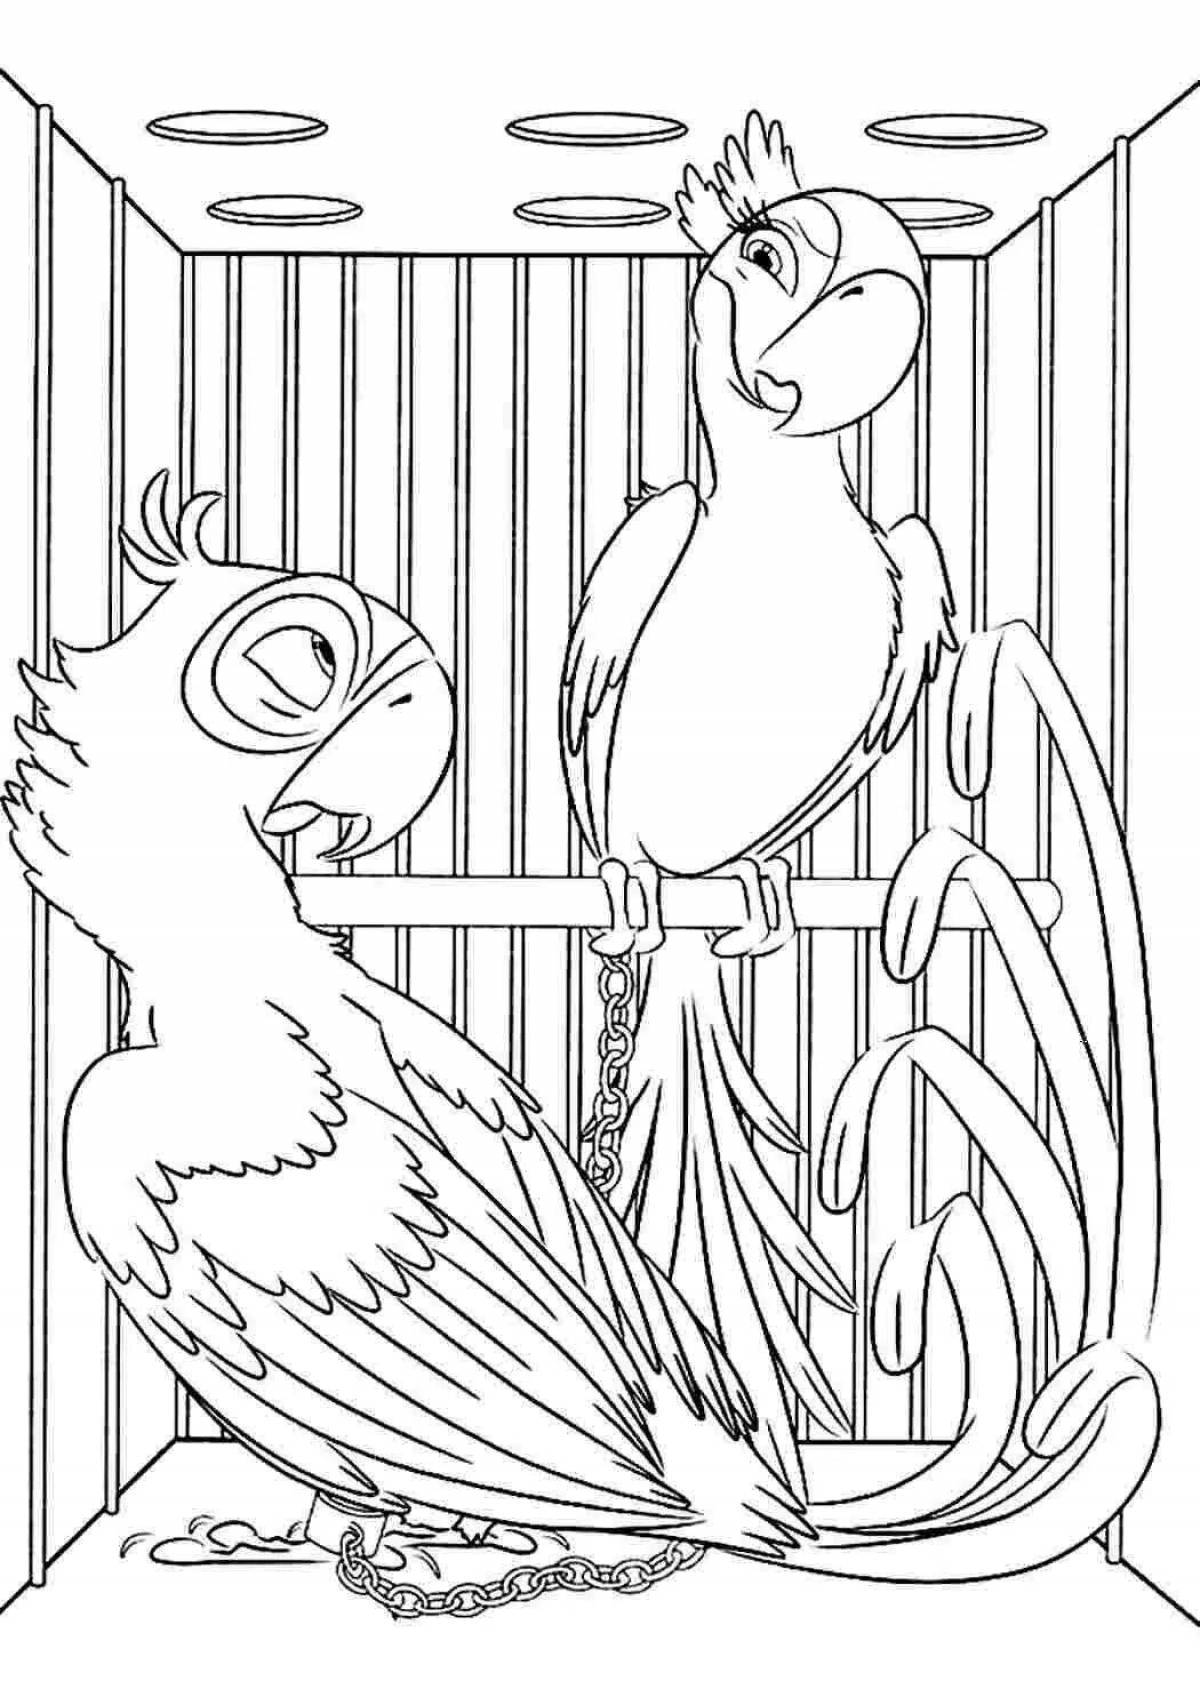 Radiant parrot in a cage